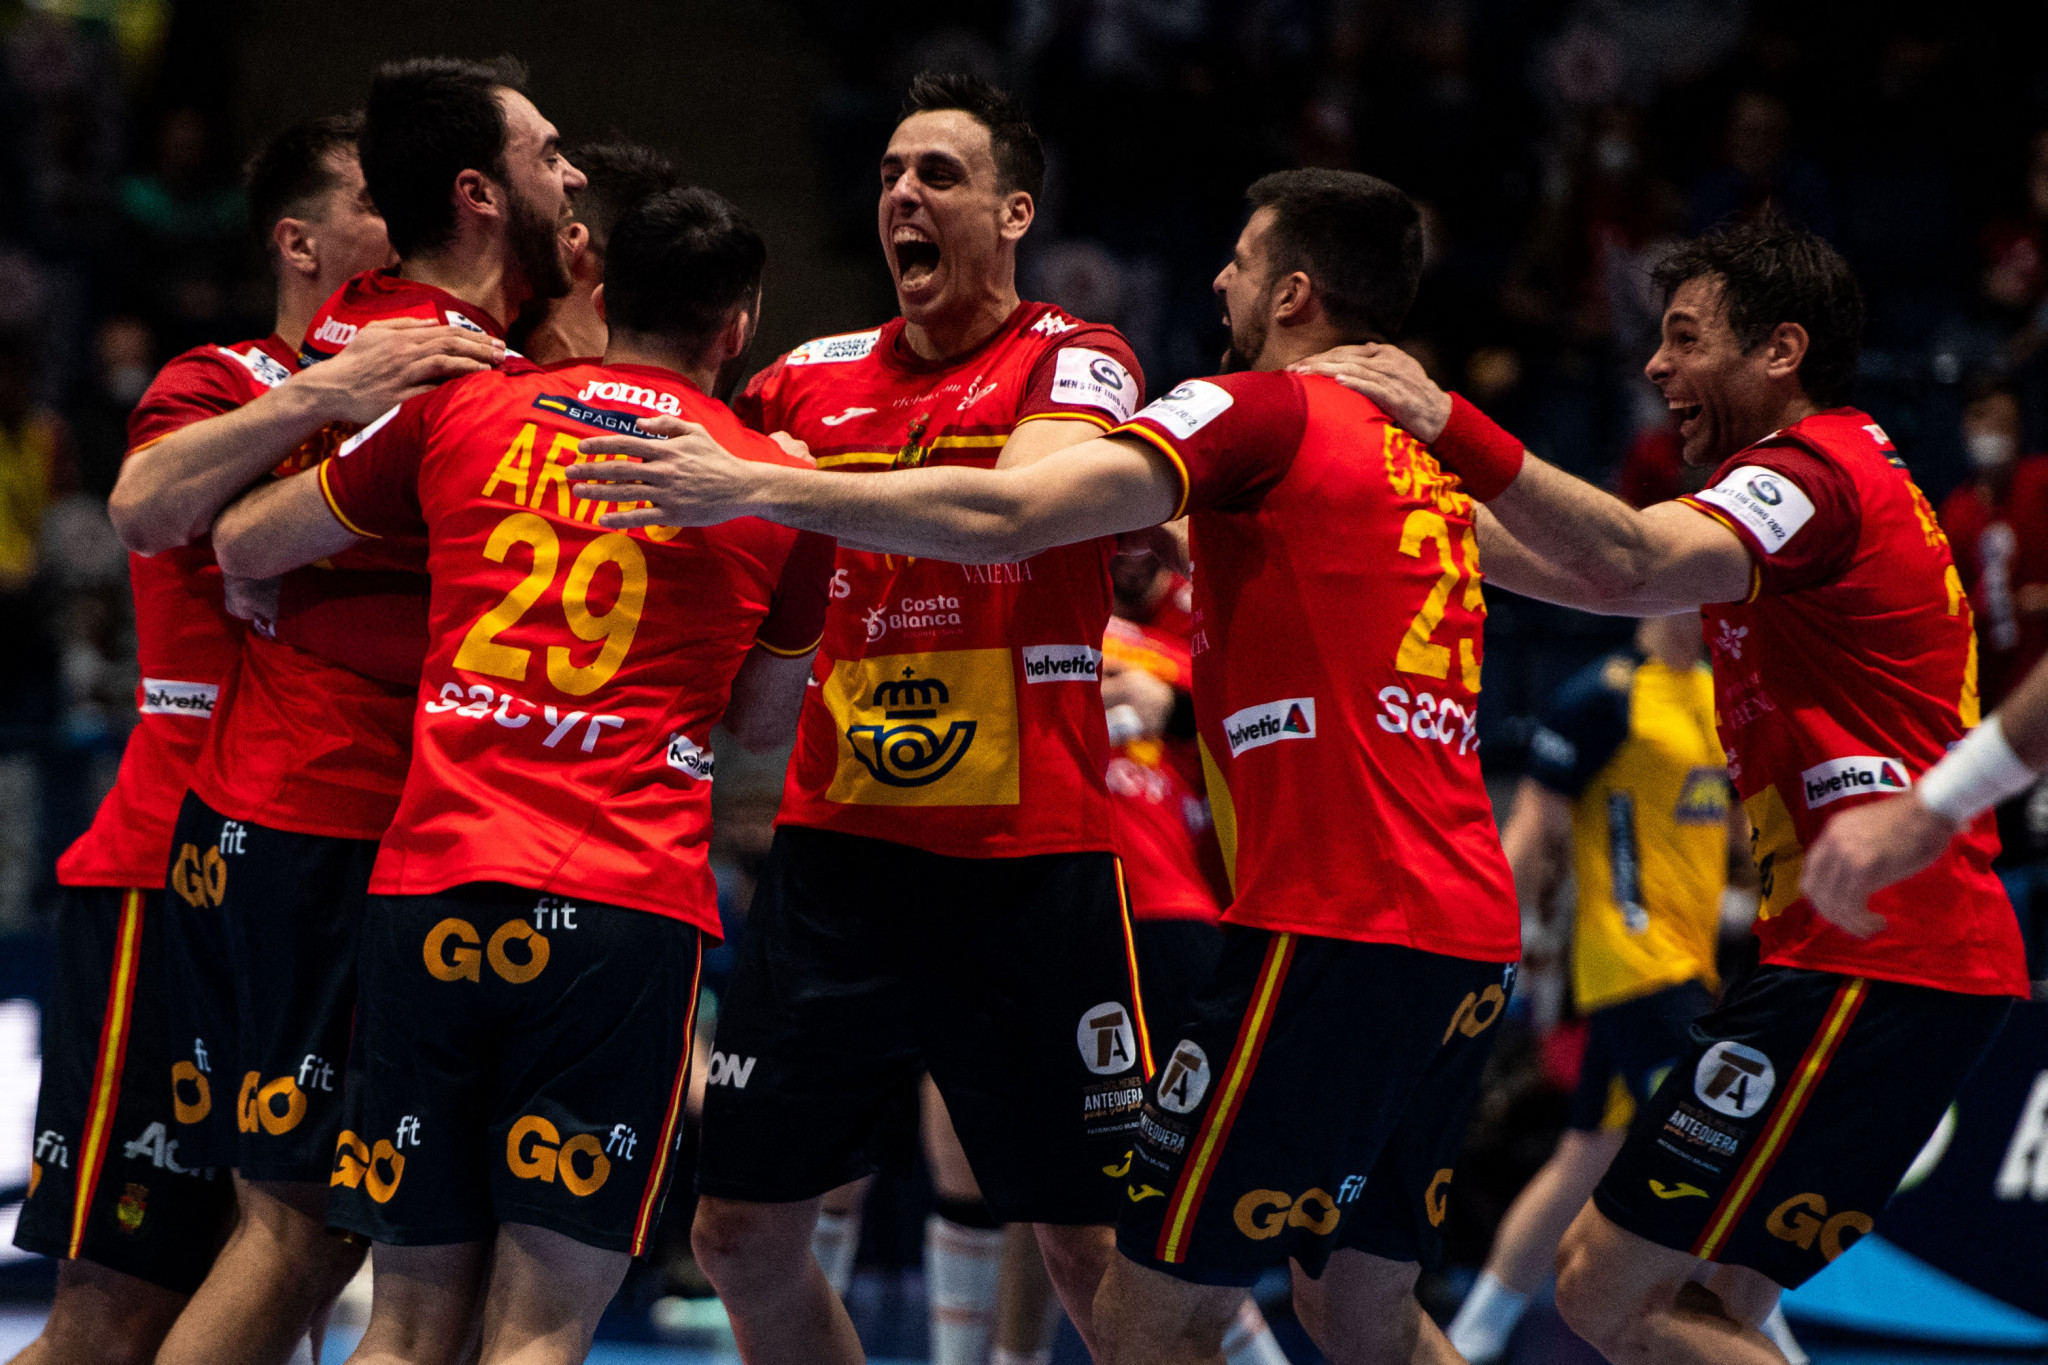 Holders Spain edge past Sweden as preliminary round continues at Men's European Handball Championship